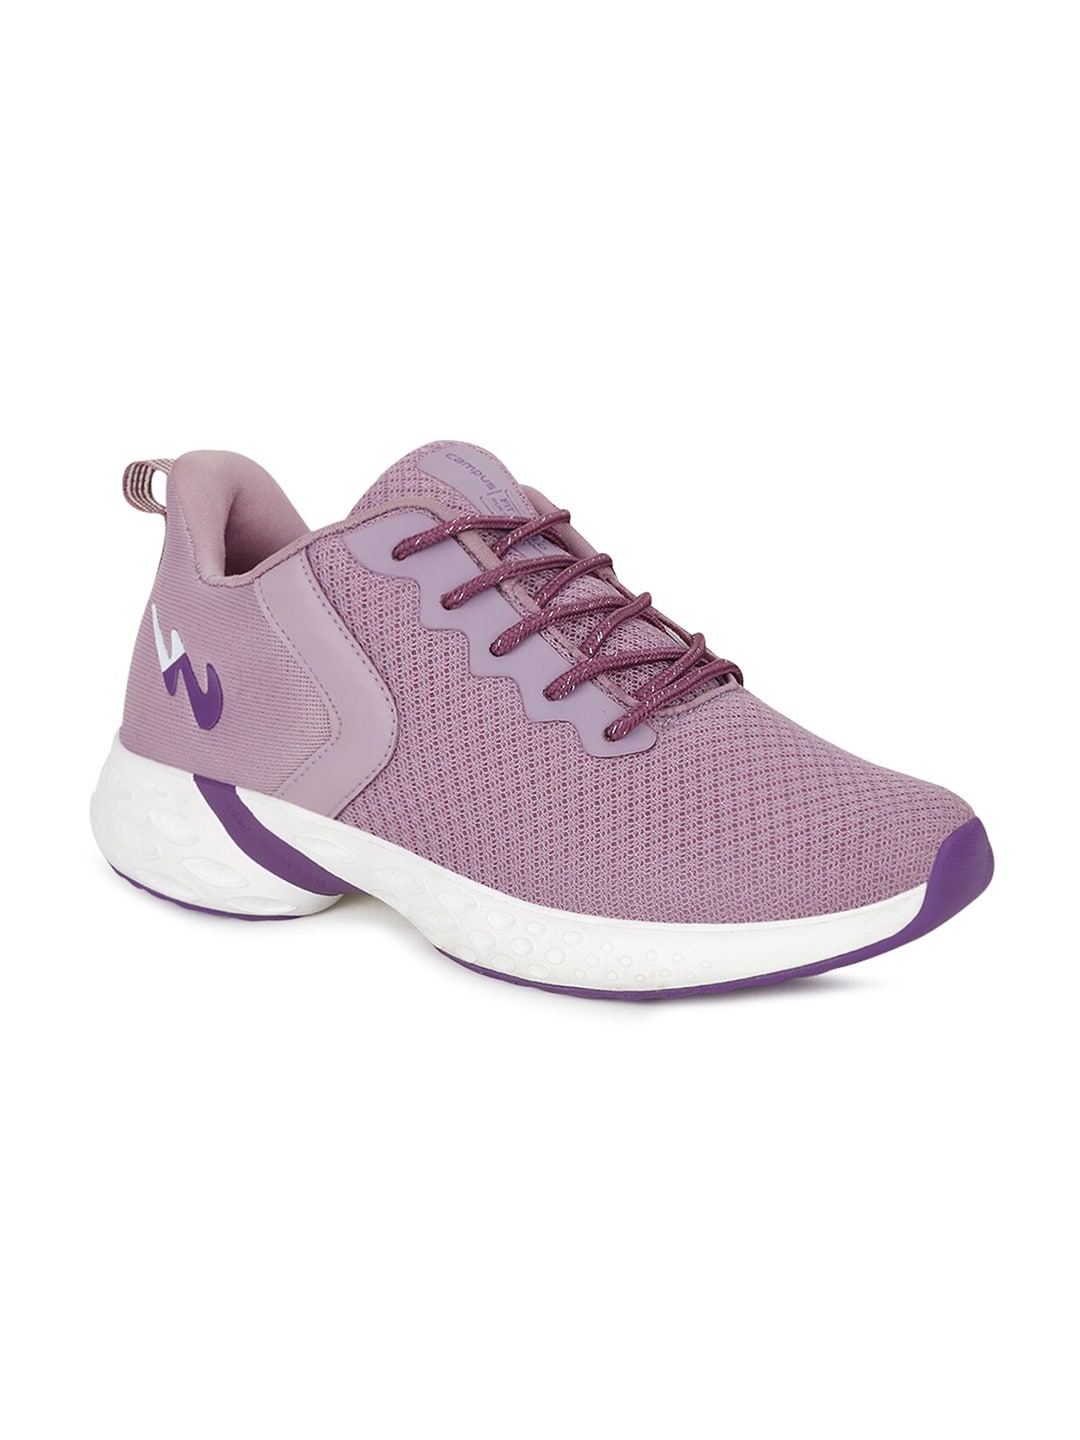 Campus Women Purple Textile Running Non-Marking Shoes Price in India